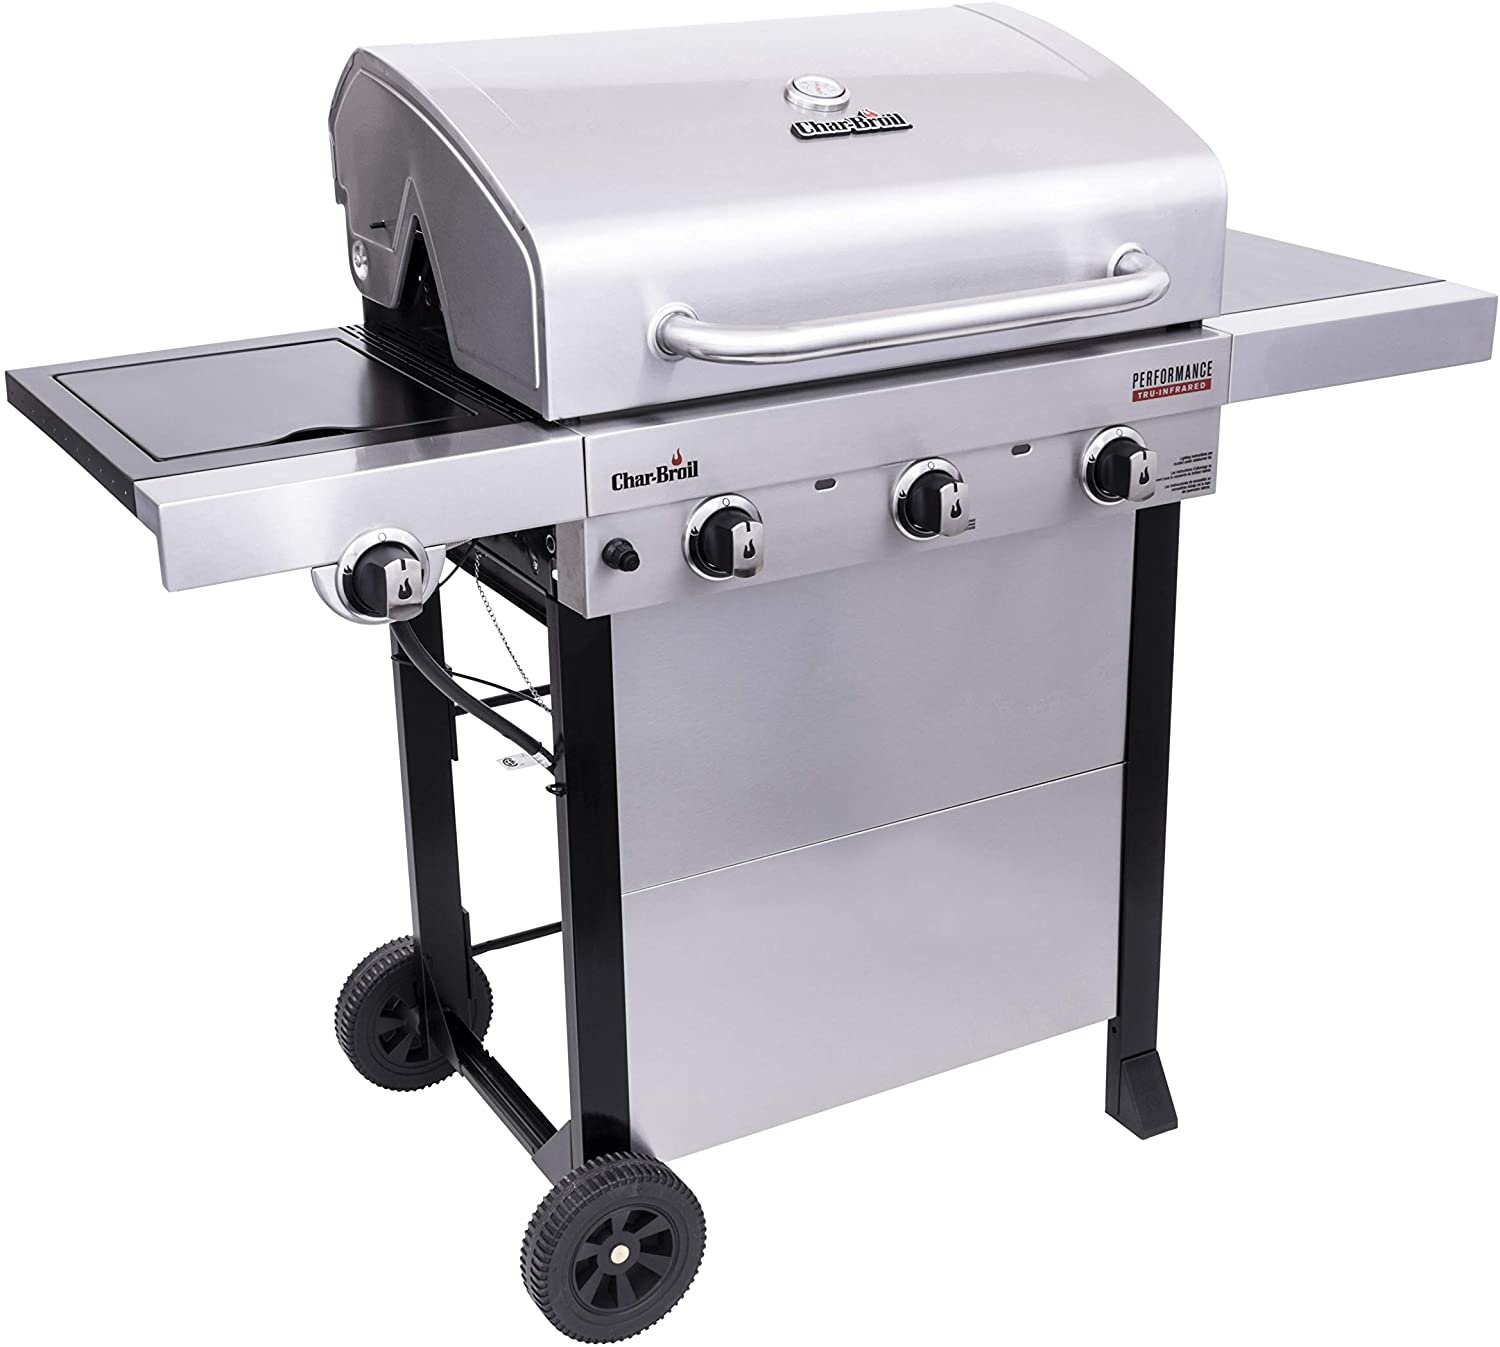 Char-Broil 463370719 Performance TRU-Infrared 3-Burner Cart Style Gas Grill, Stainless Steel - image 2 of 6